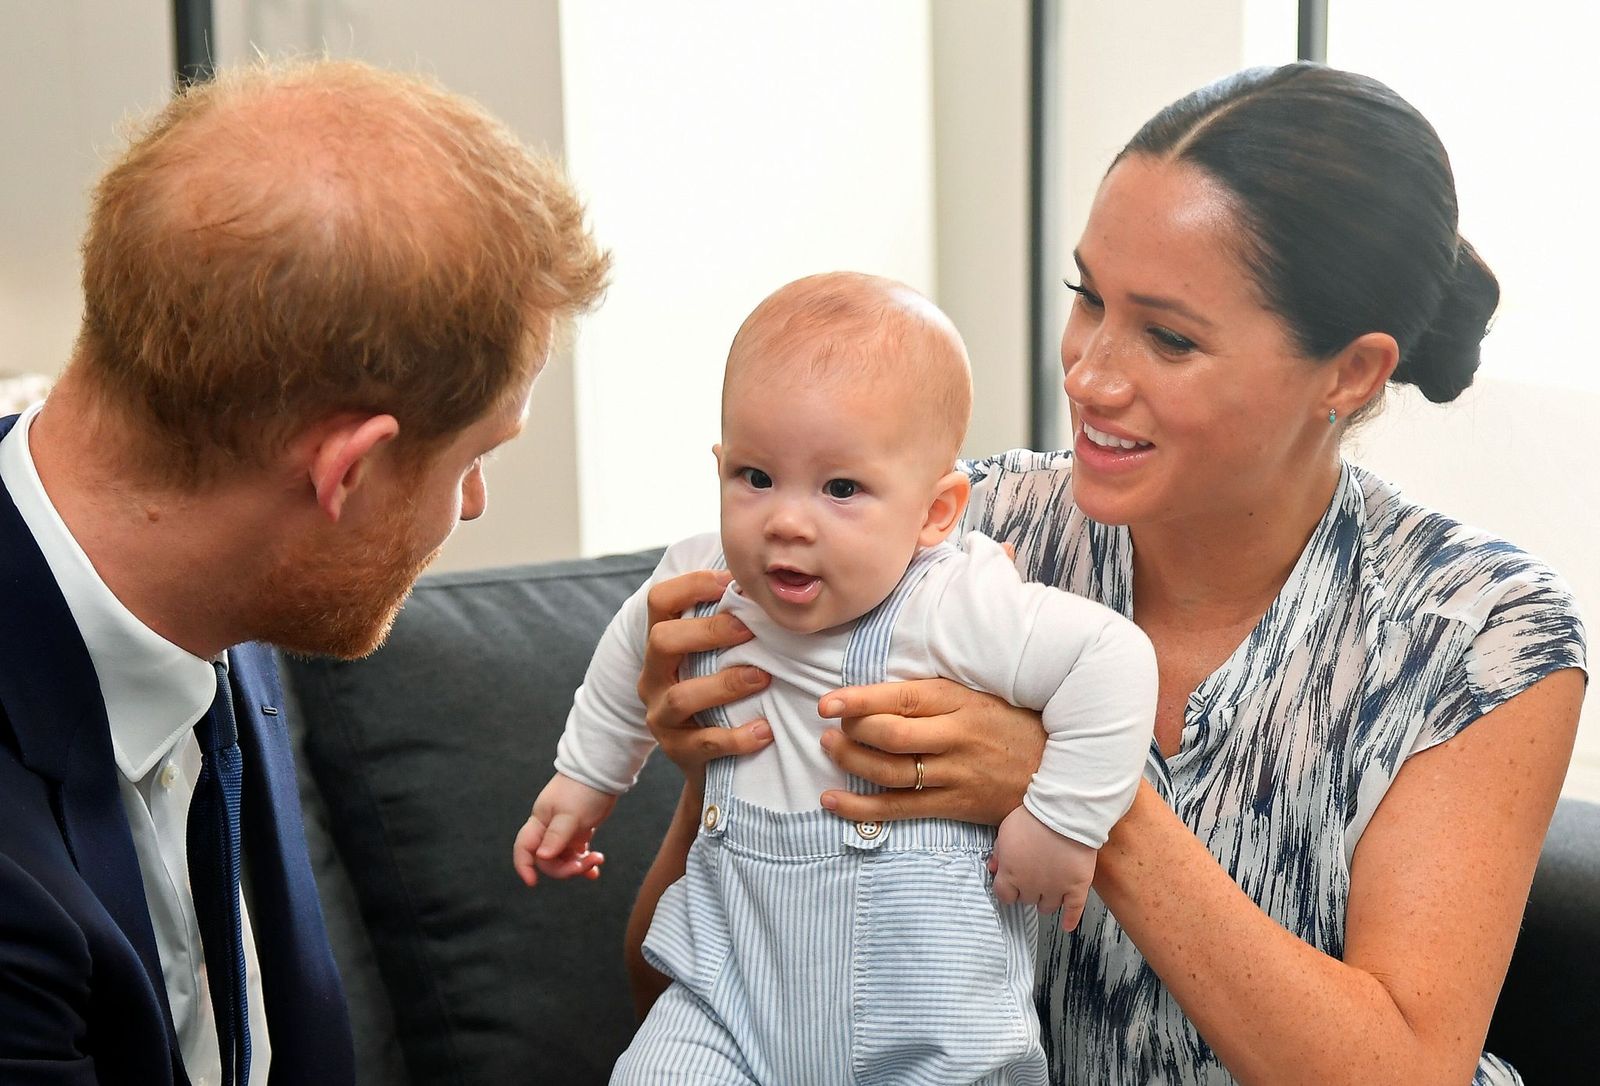 Prince Harry and Duchess Meghan with their son Archie at the Desmond & Leah Tutu Legacy Foundation in Cape Town, South Africa, on September 25, 2019. | Source: REUTERS/Toby Melville/Pool/PA Images/Getty Images